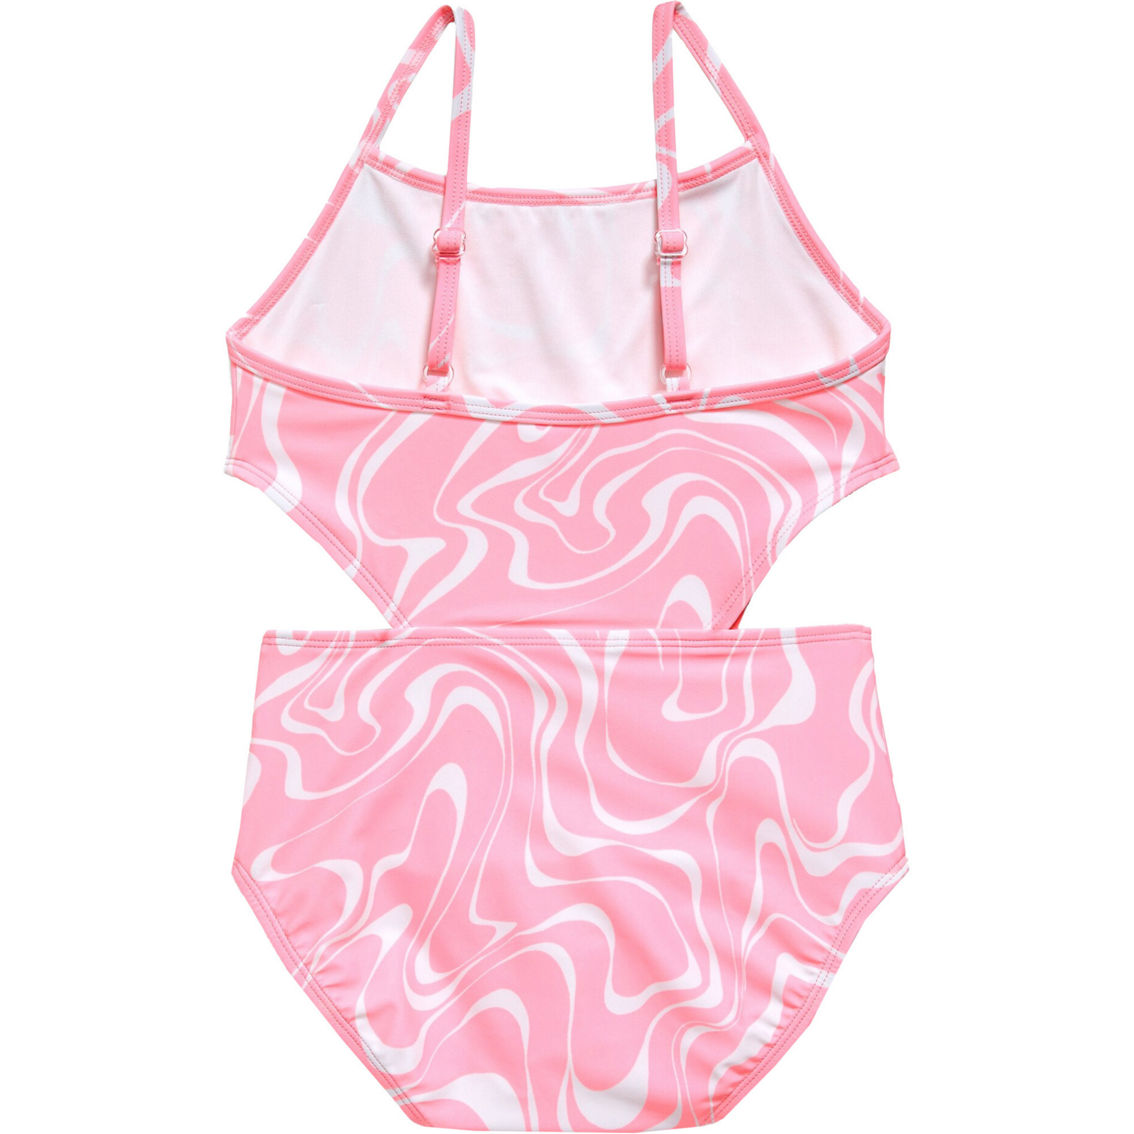 Old Navy Little Girls Hip Cutout 1 pc. Swimsuit - Image 2 of 2